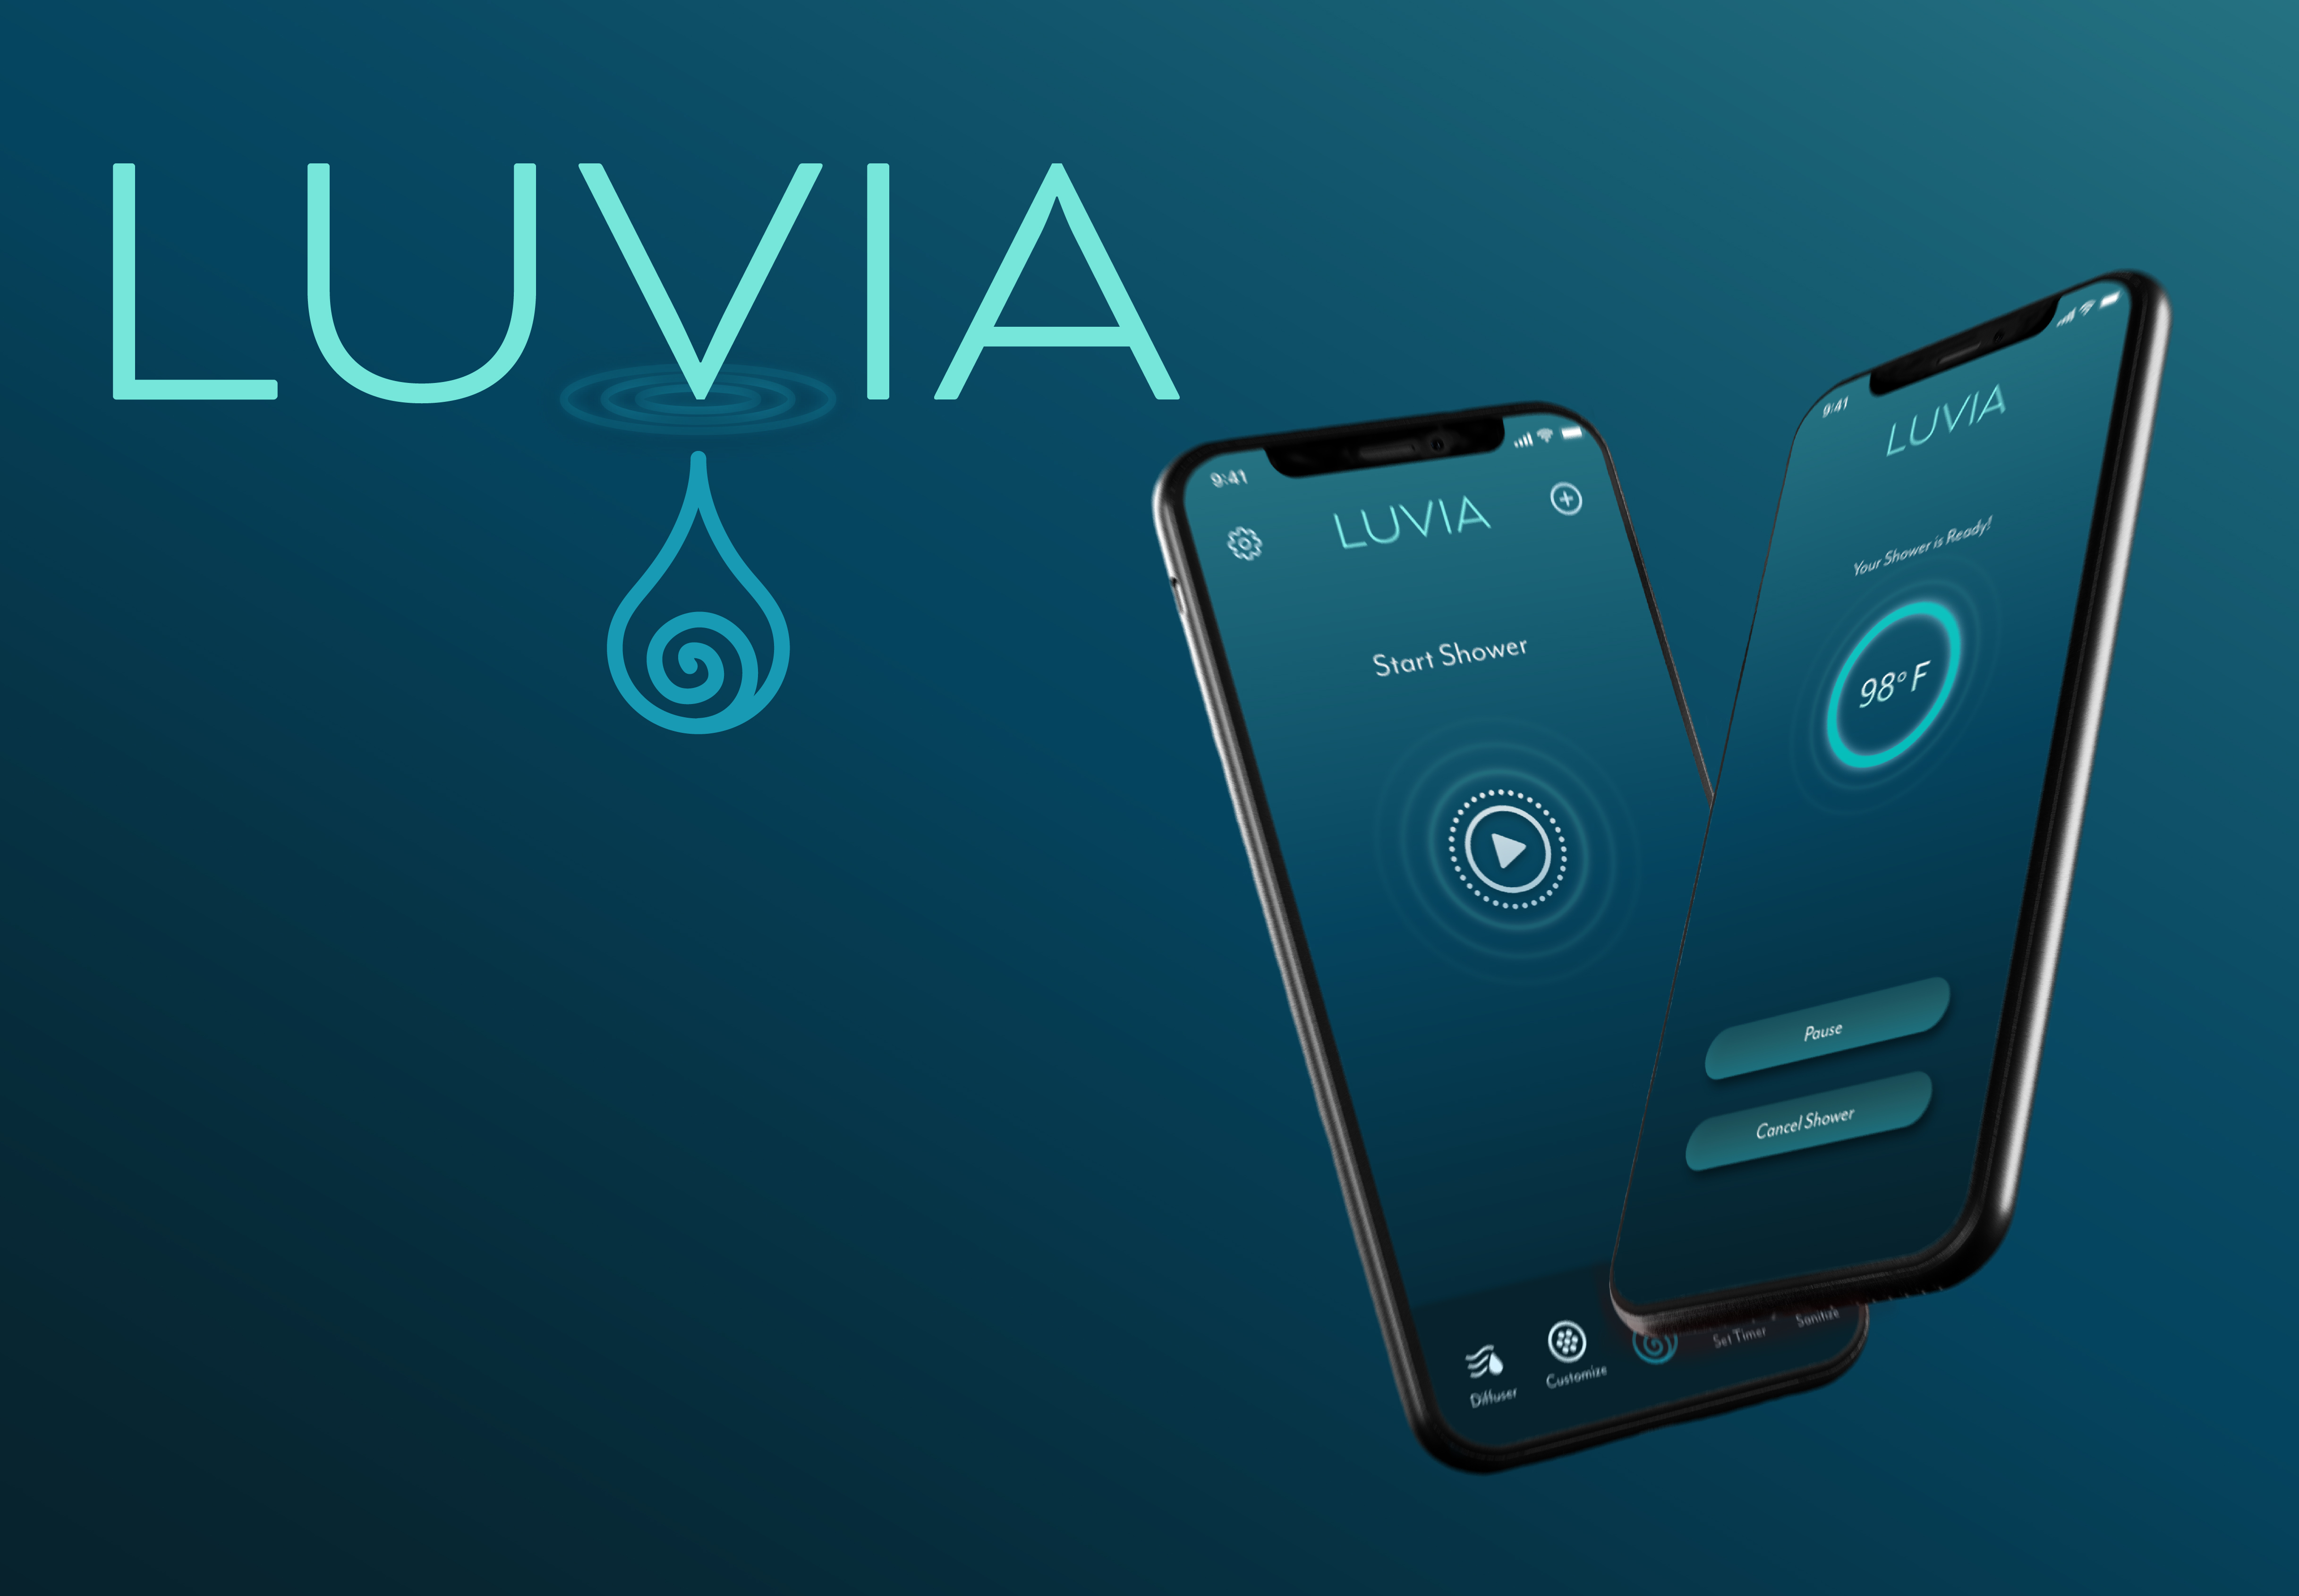 LUVIA Smart Shower System: Application Design and Prototyping